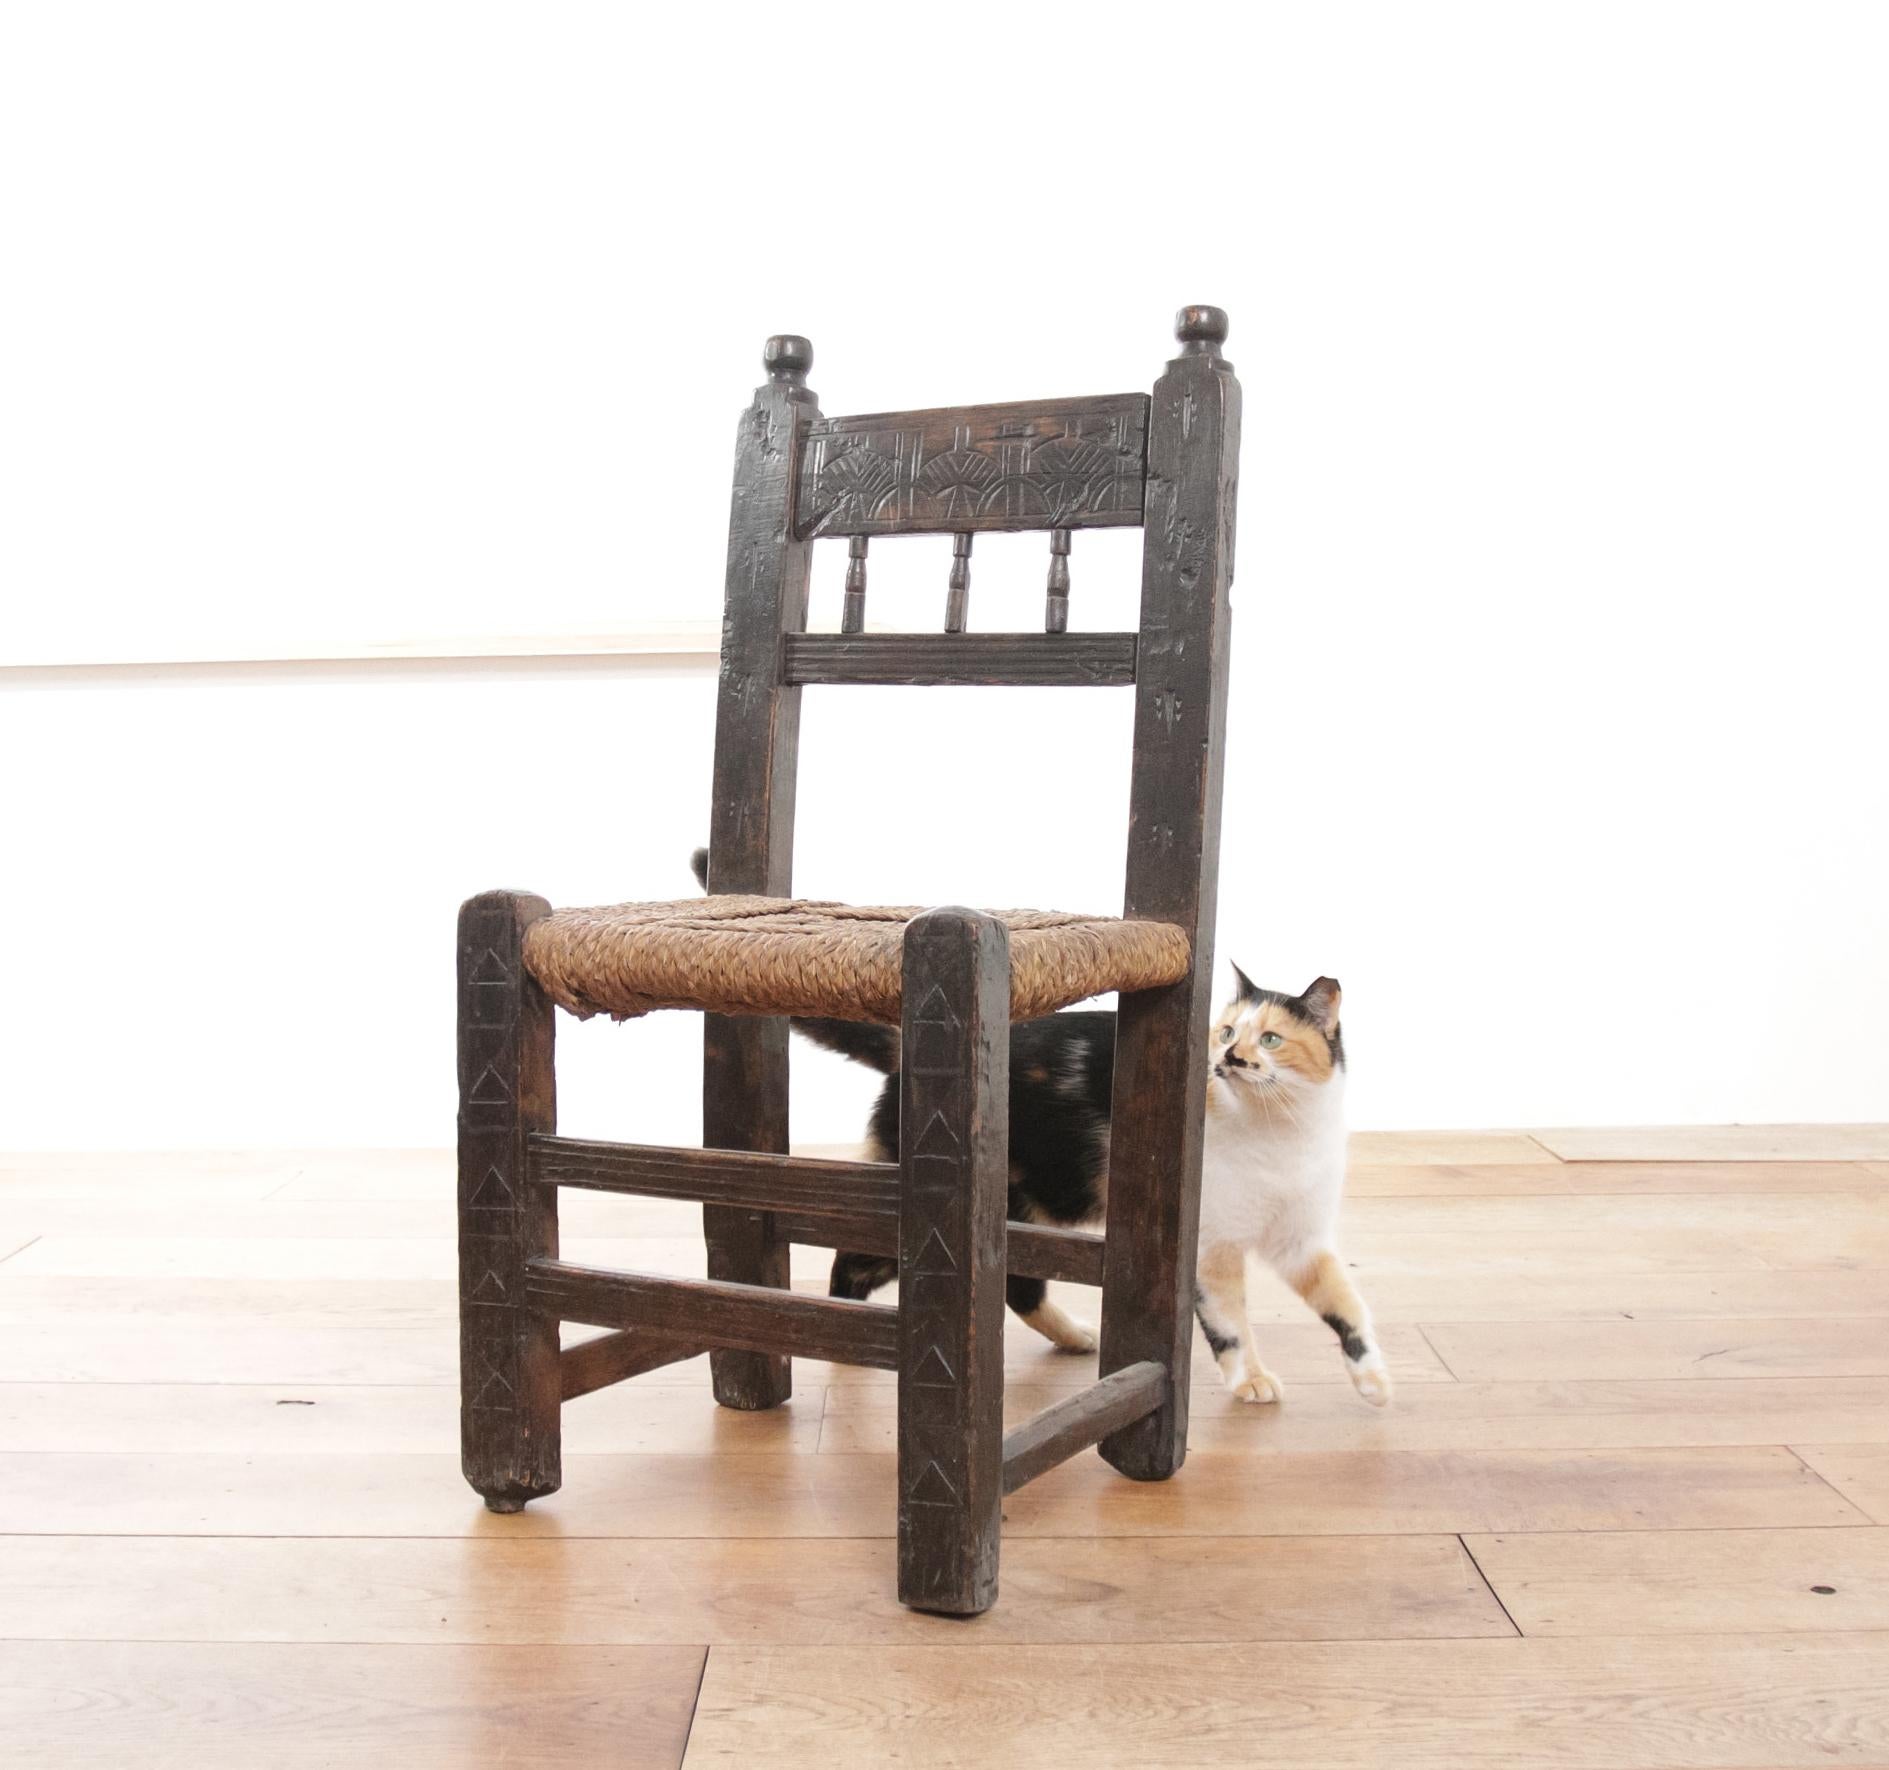 Acquire a fragment of pastoral elegance with this original 17th-century farmer's chair, a treasure adorned with hand-carved motifs that complement a minimalist or wabi-sabi style interior flawlessly. This chair, which honors simplicity and the